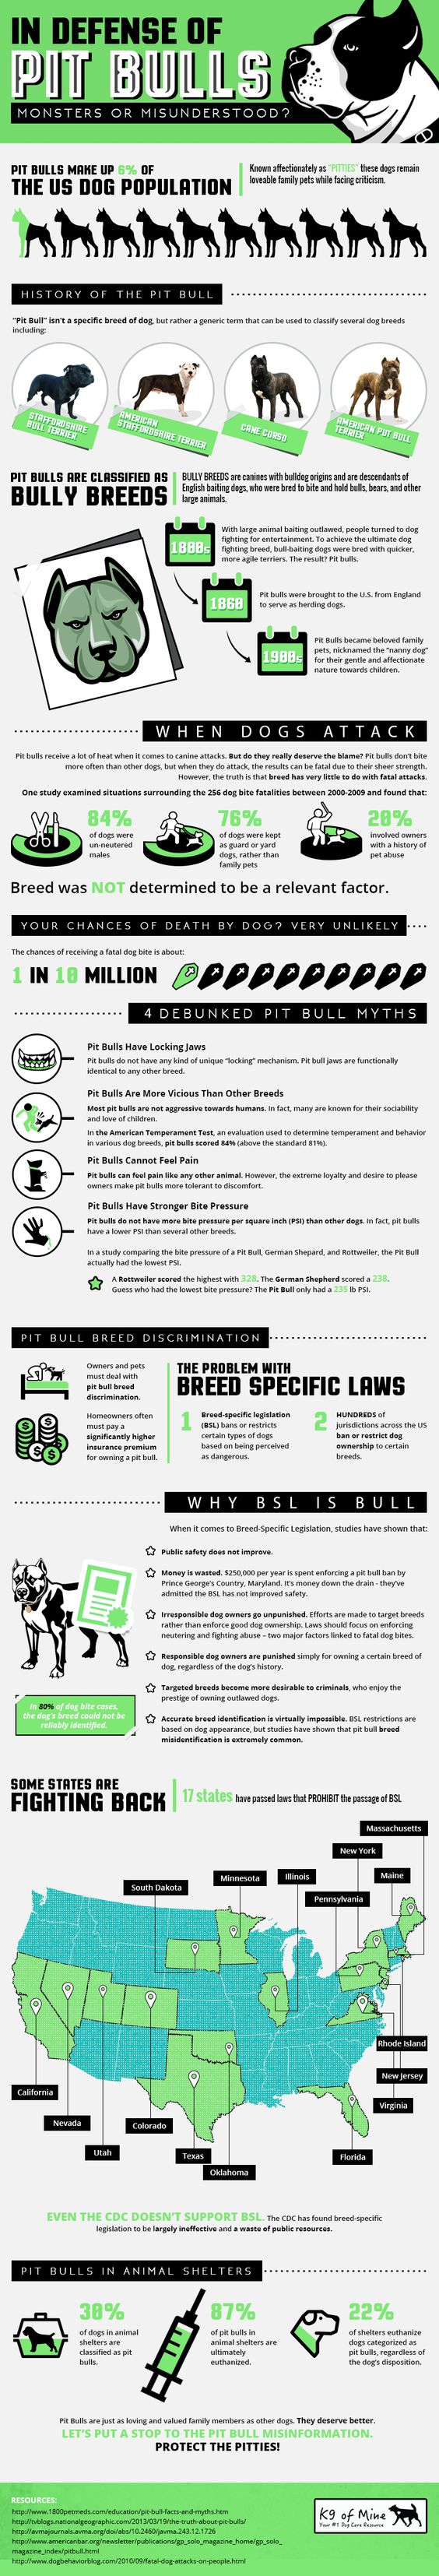 Are Pitbulls dangerous - get the facts from this enlightening infographic.